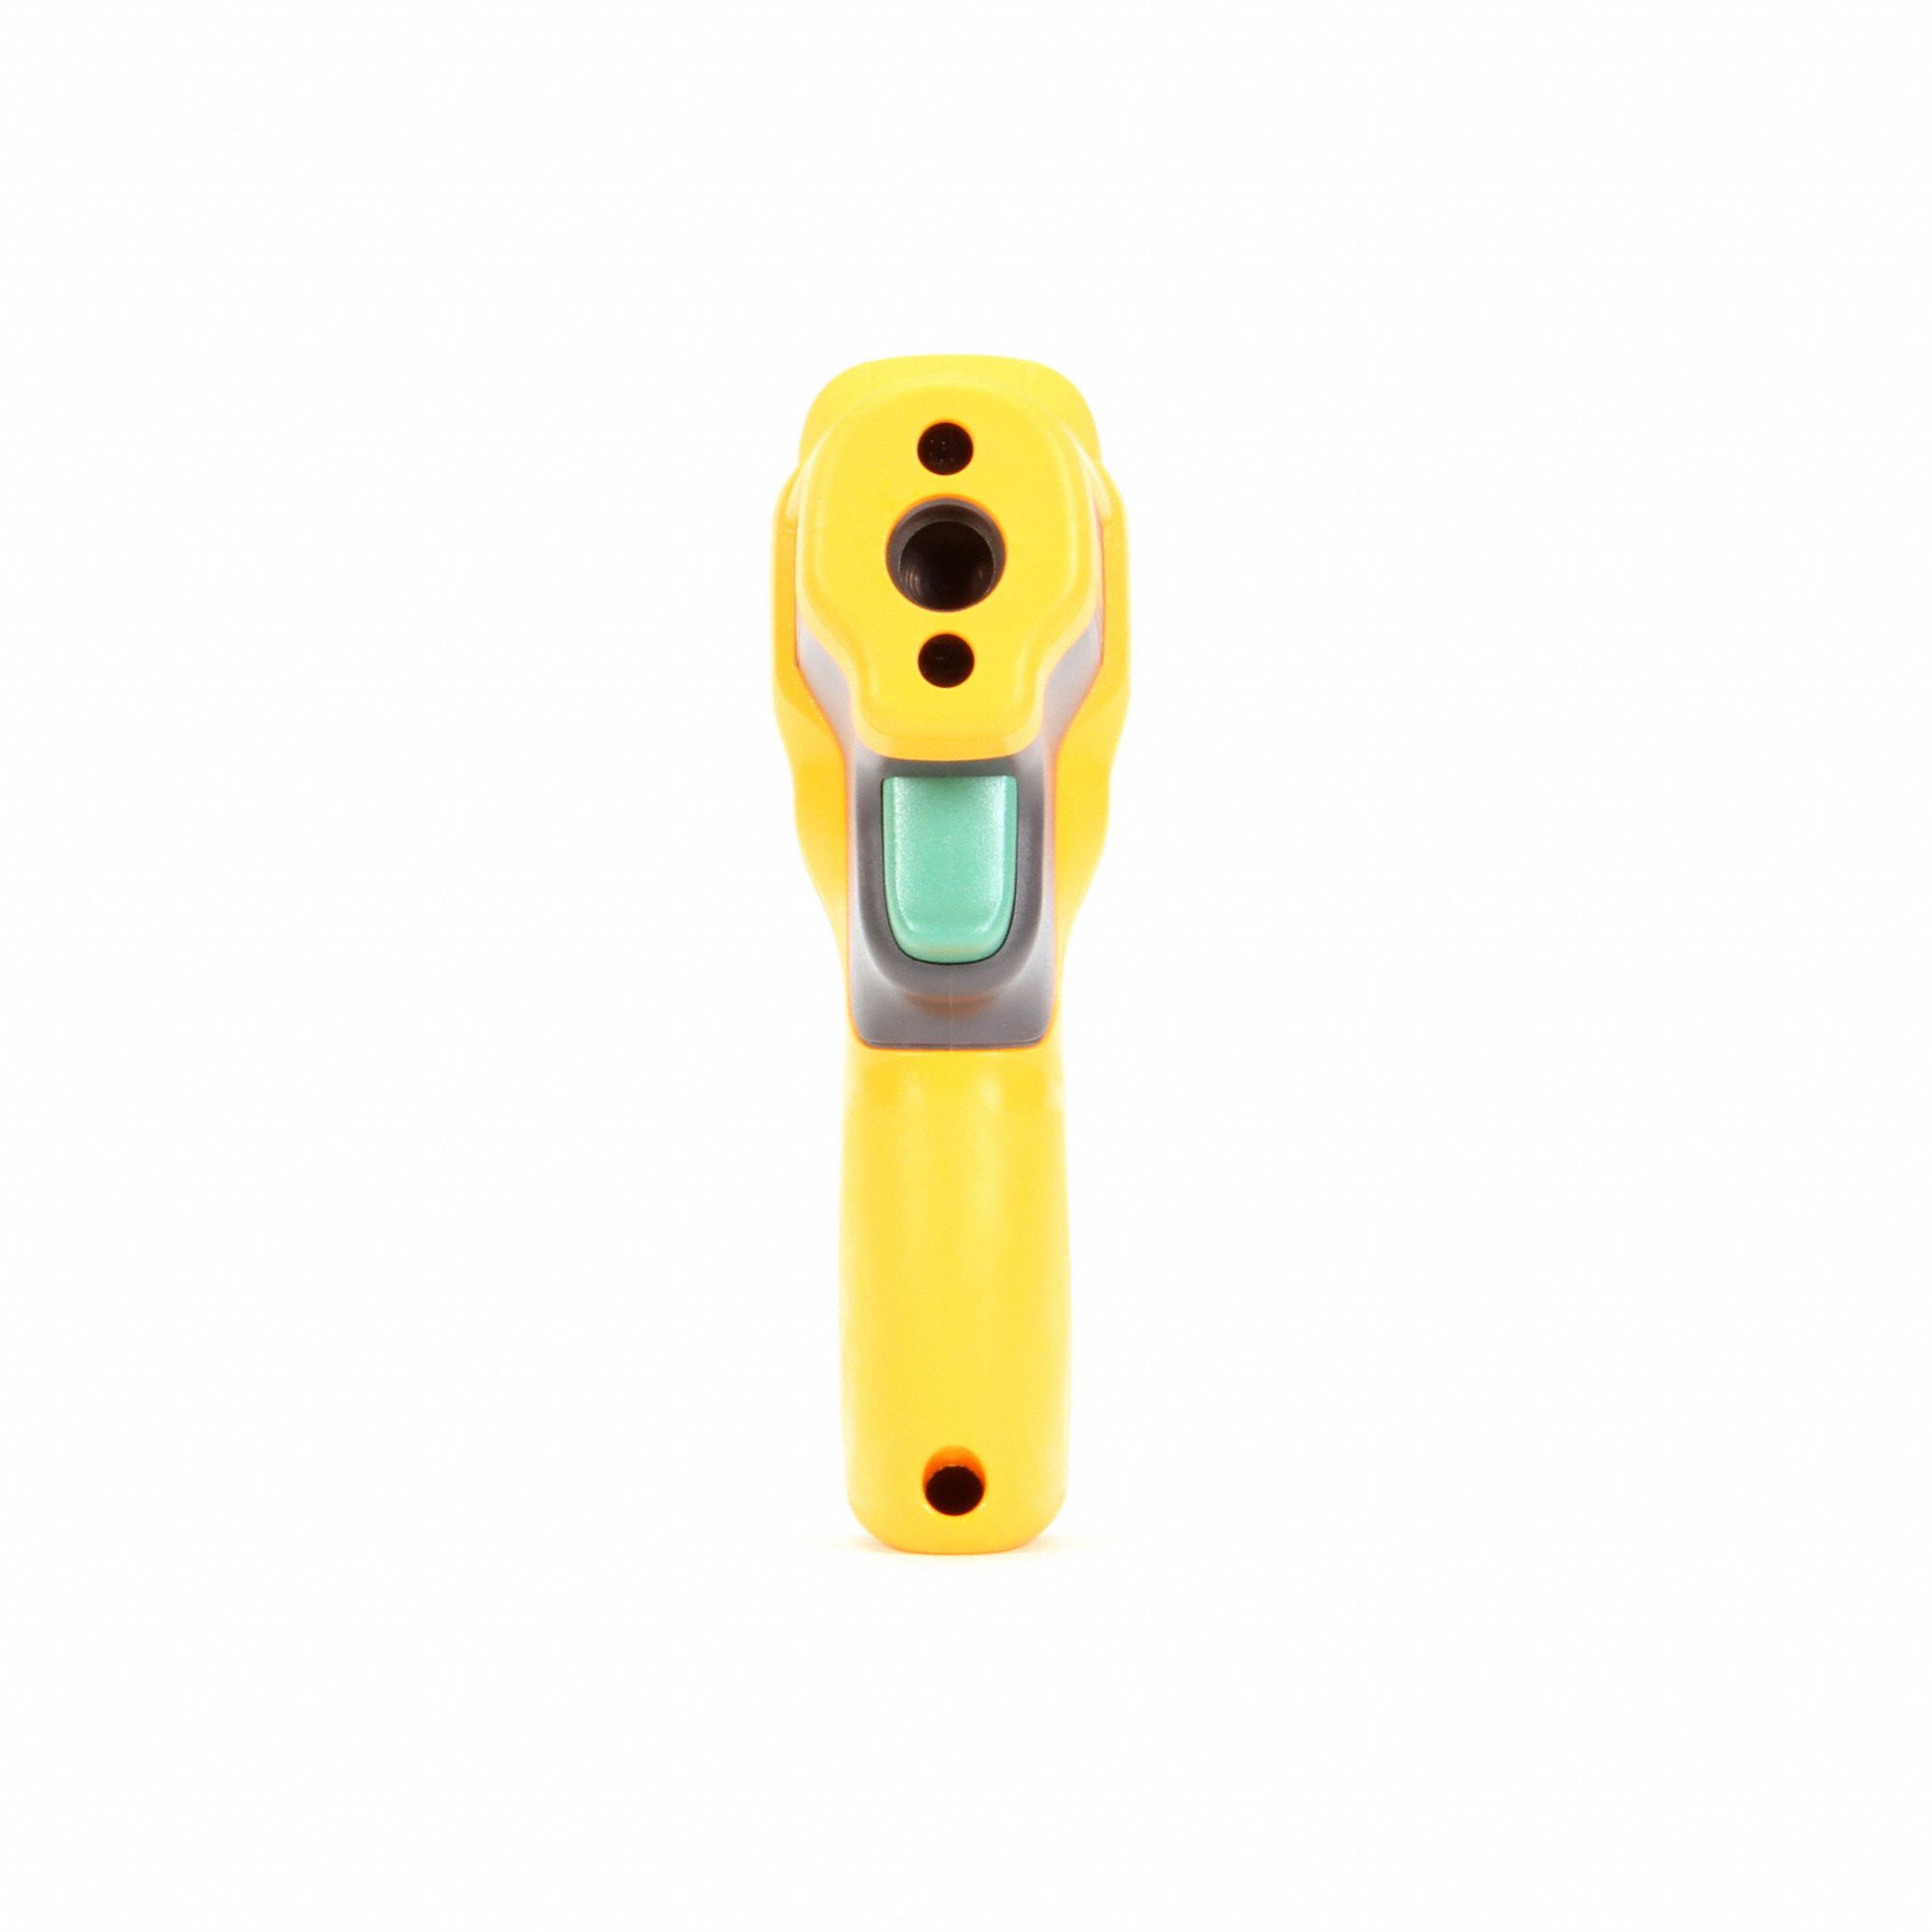 20 to 1650°C, 50:1 FOV, Infrared Thermometer